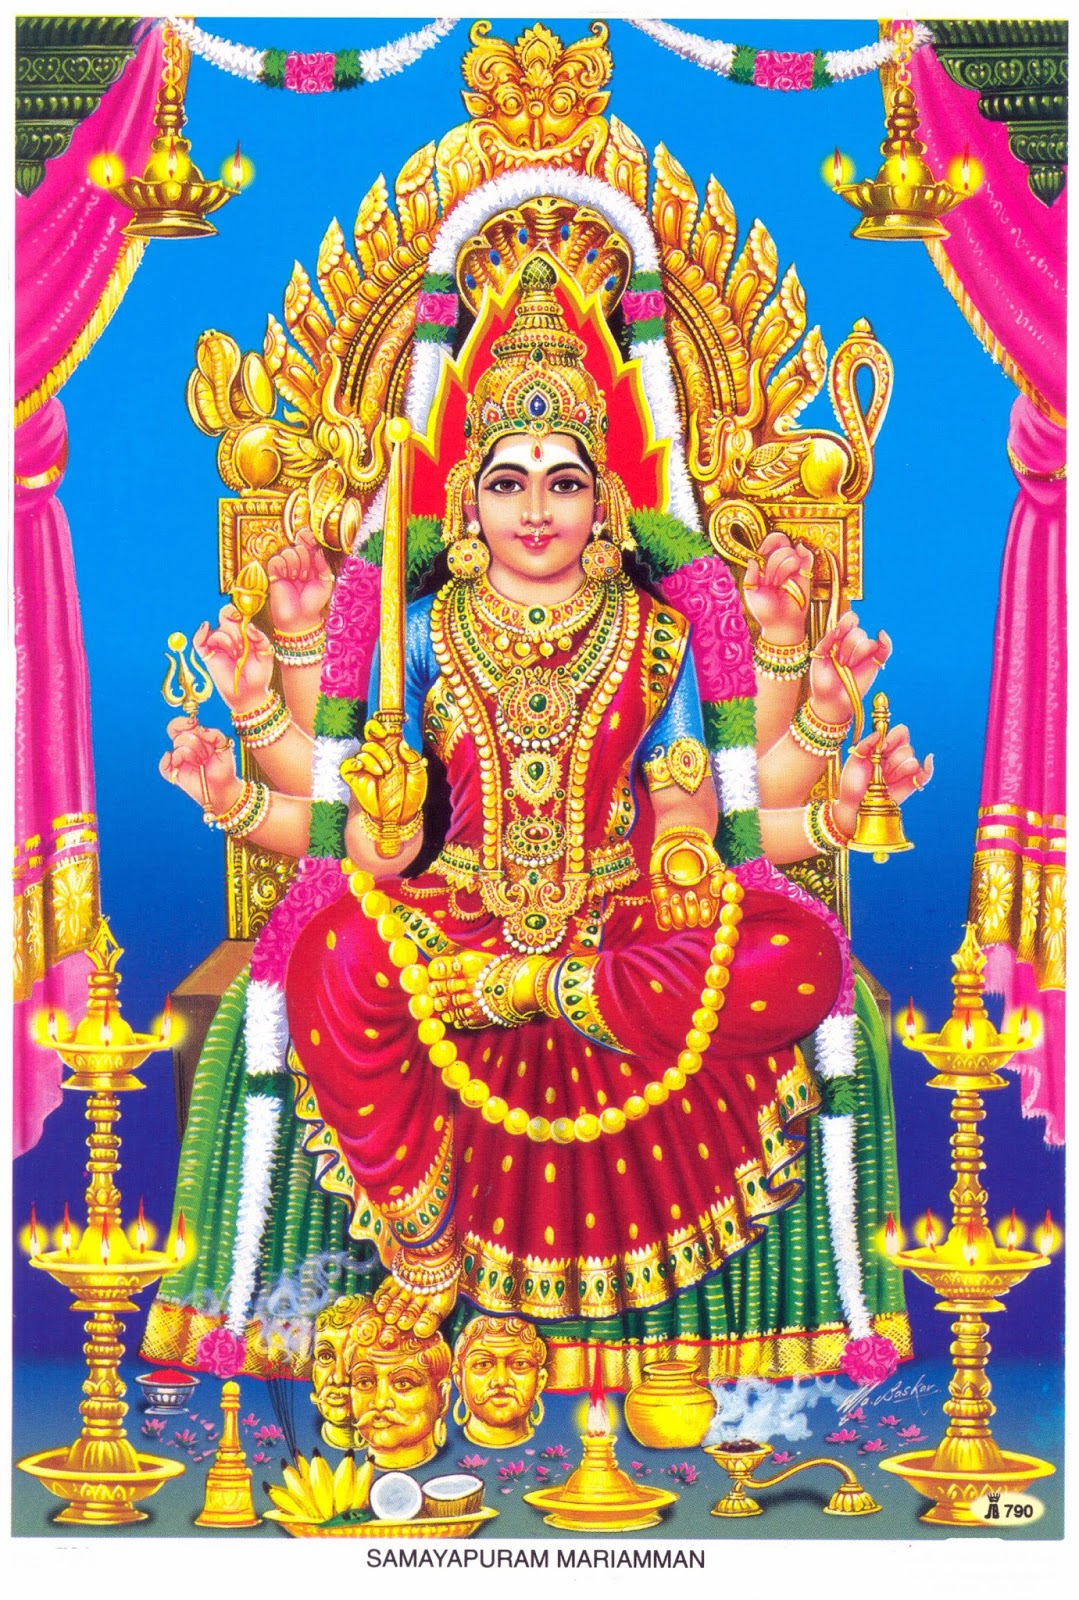 mariamman wallpaper,hindu temple,temple,place of worship,tradition,shrine